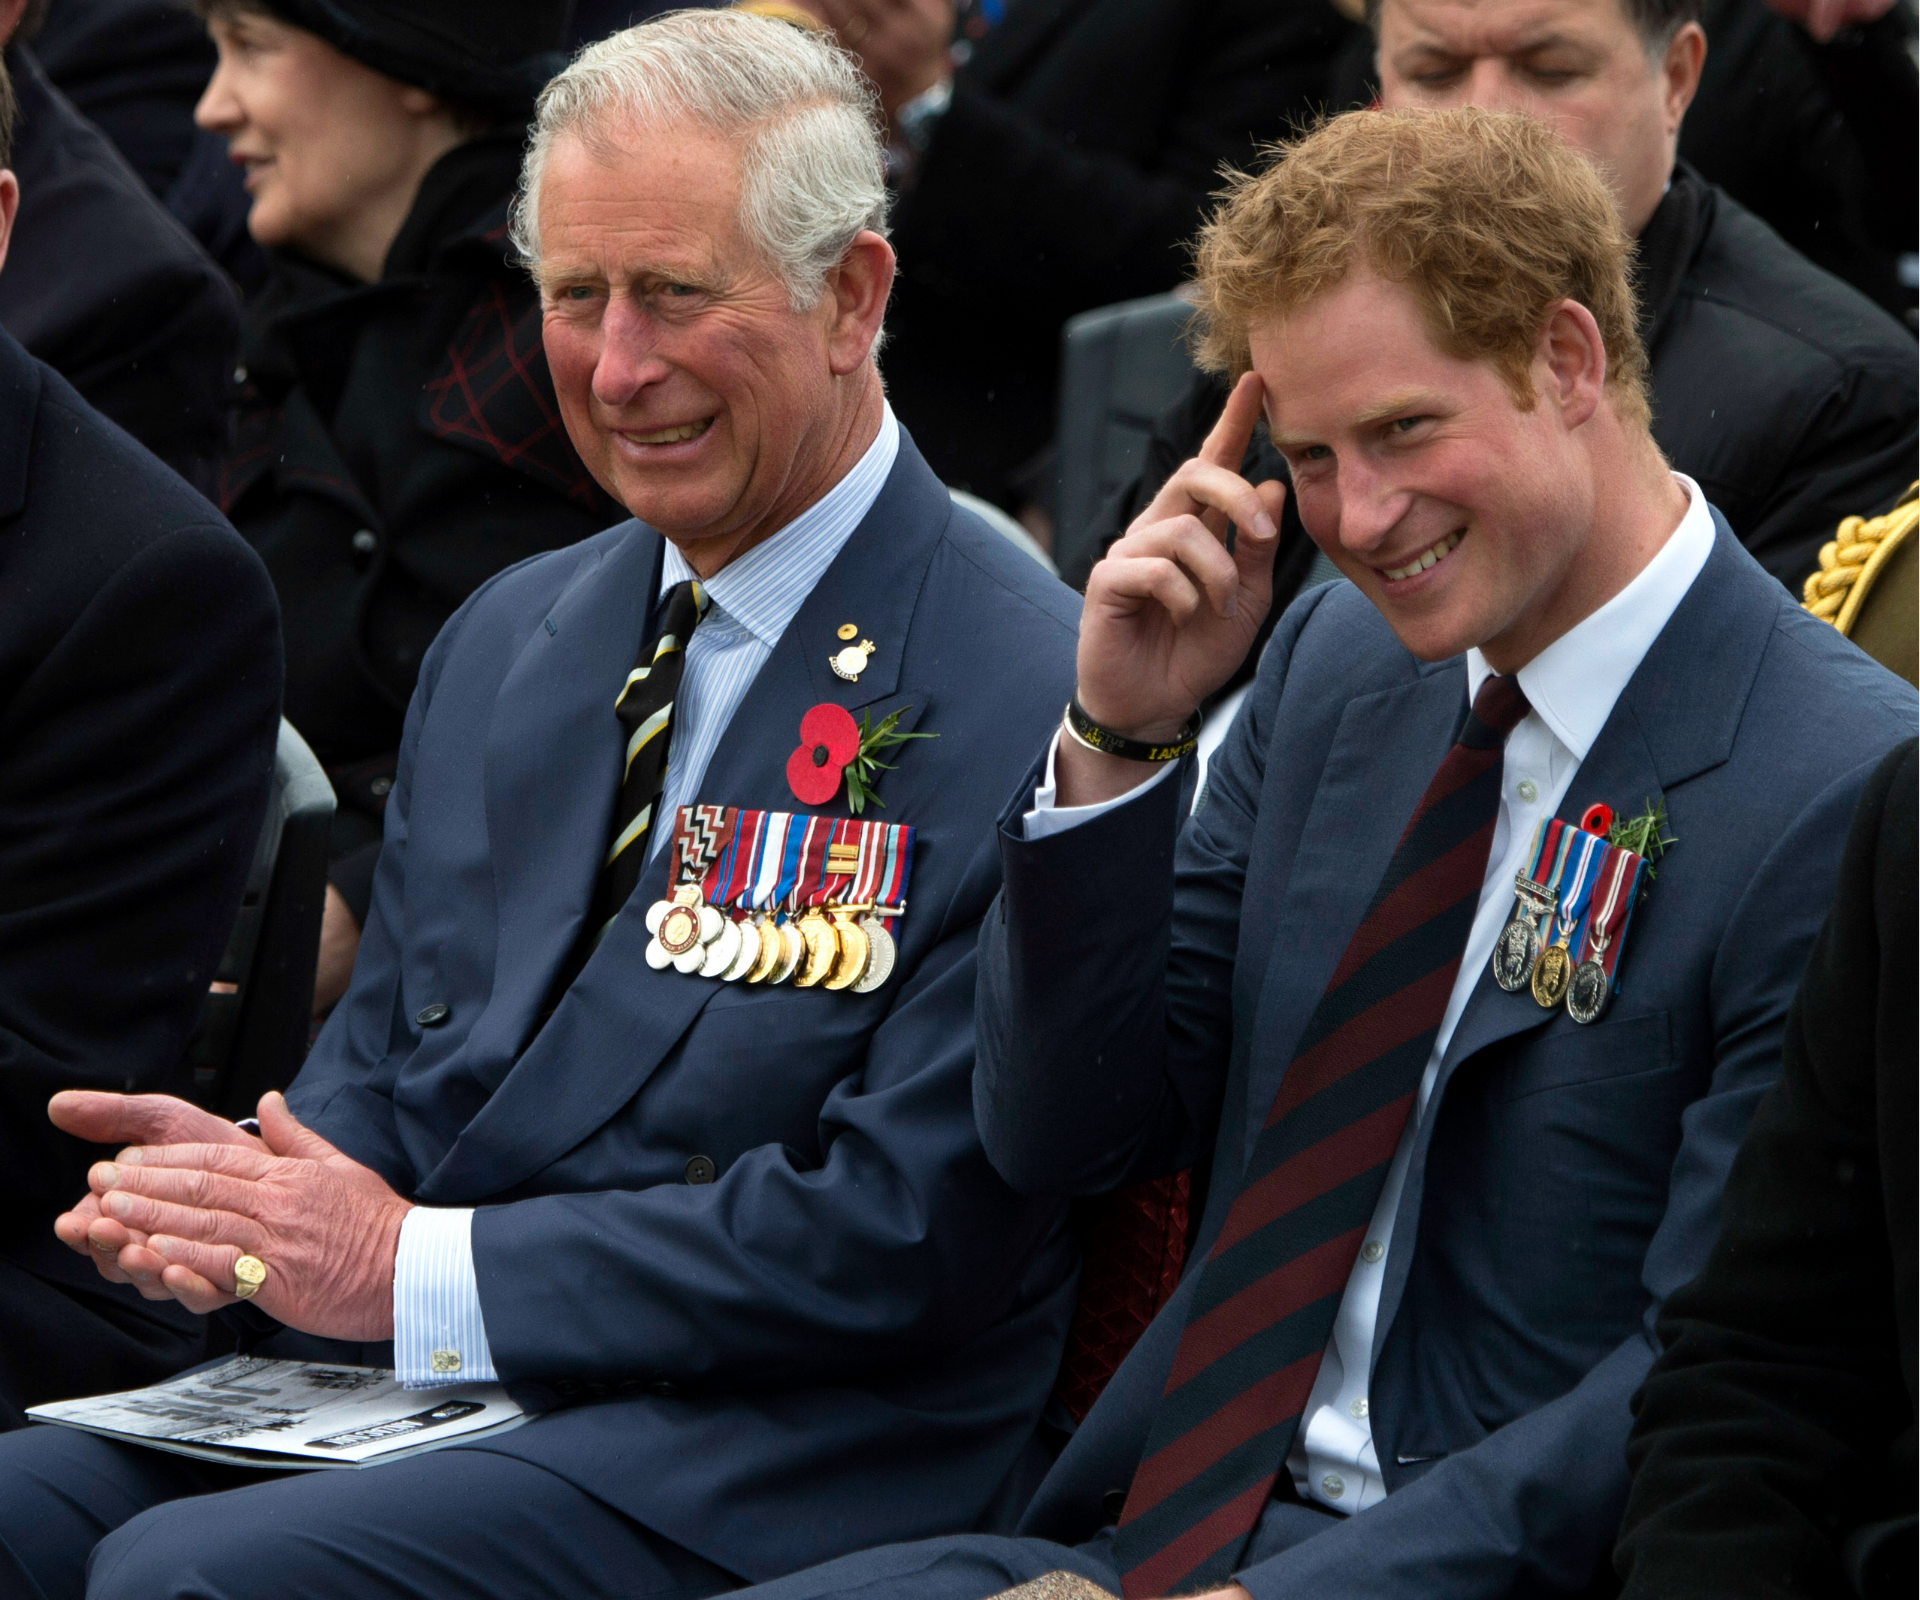 Royal tour: Prince Charles says Harry is a “jolly good egg”